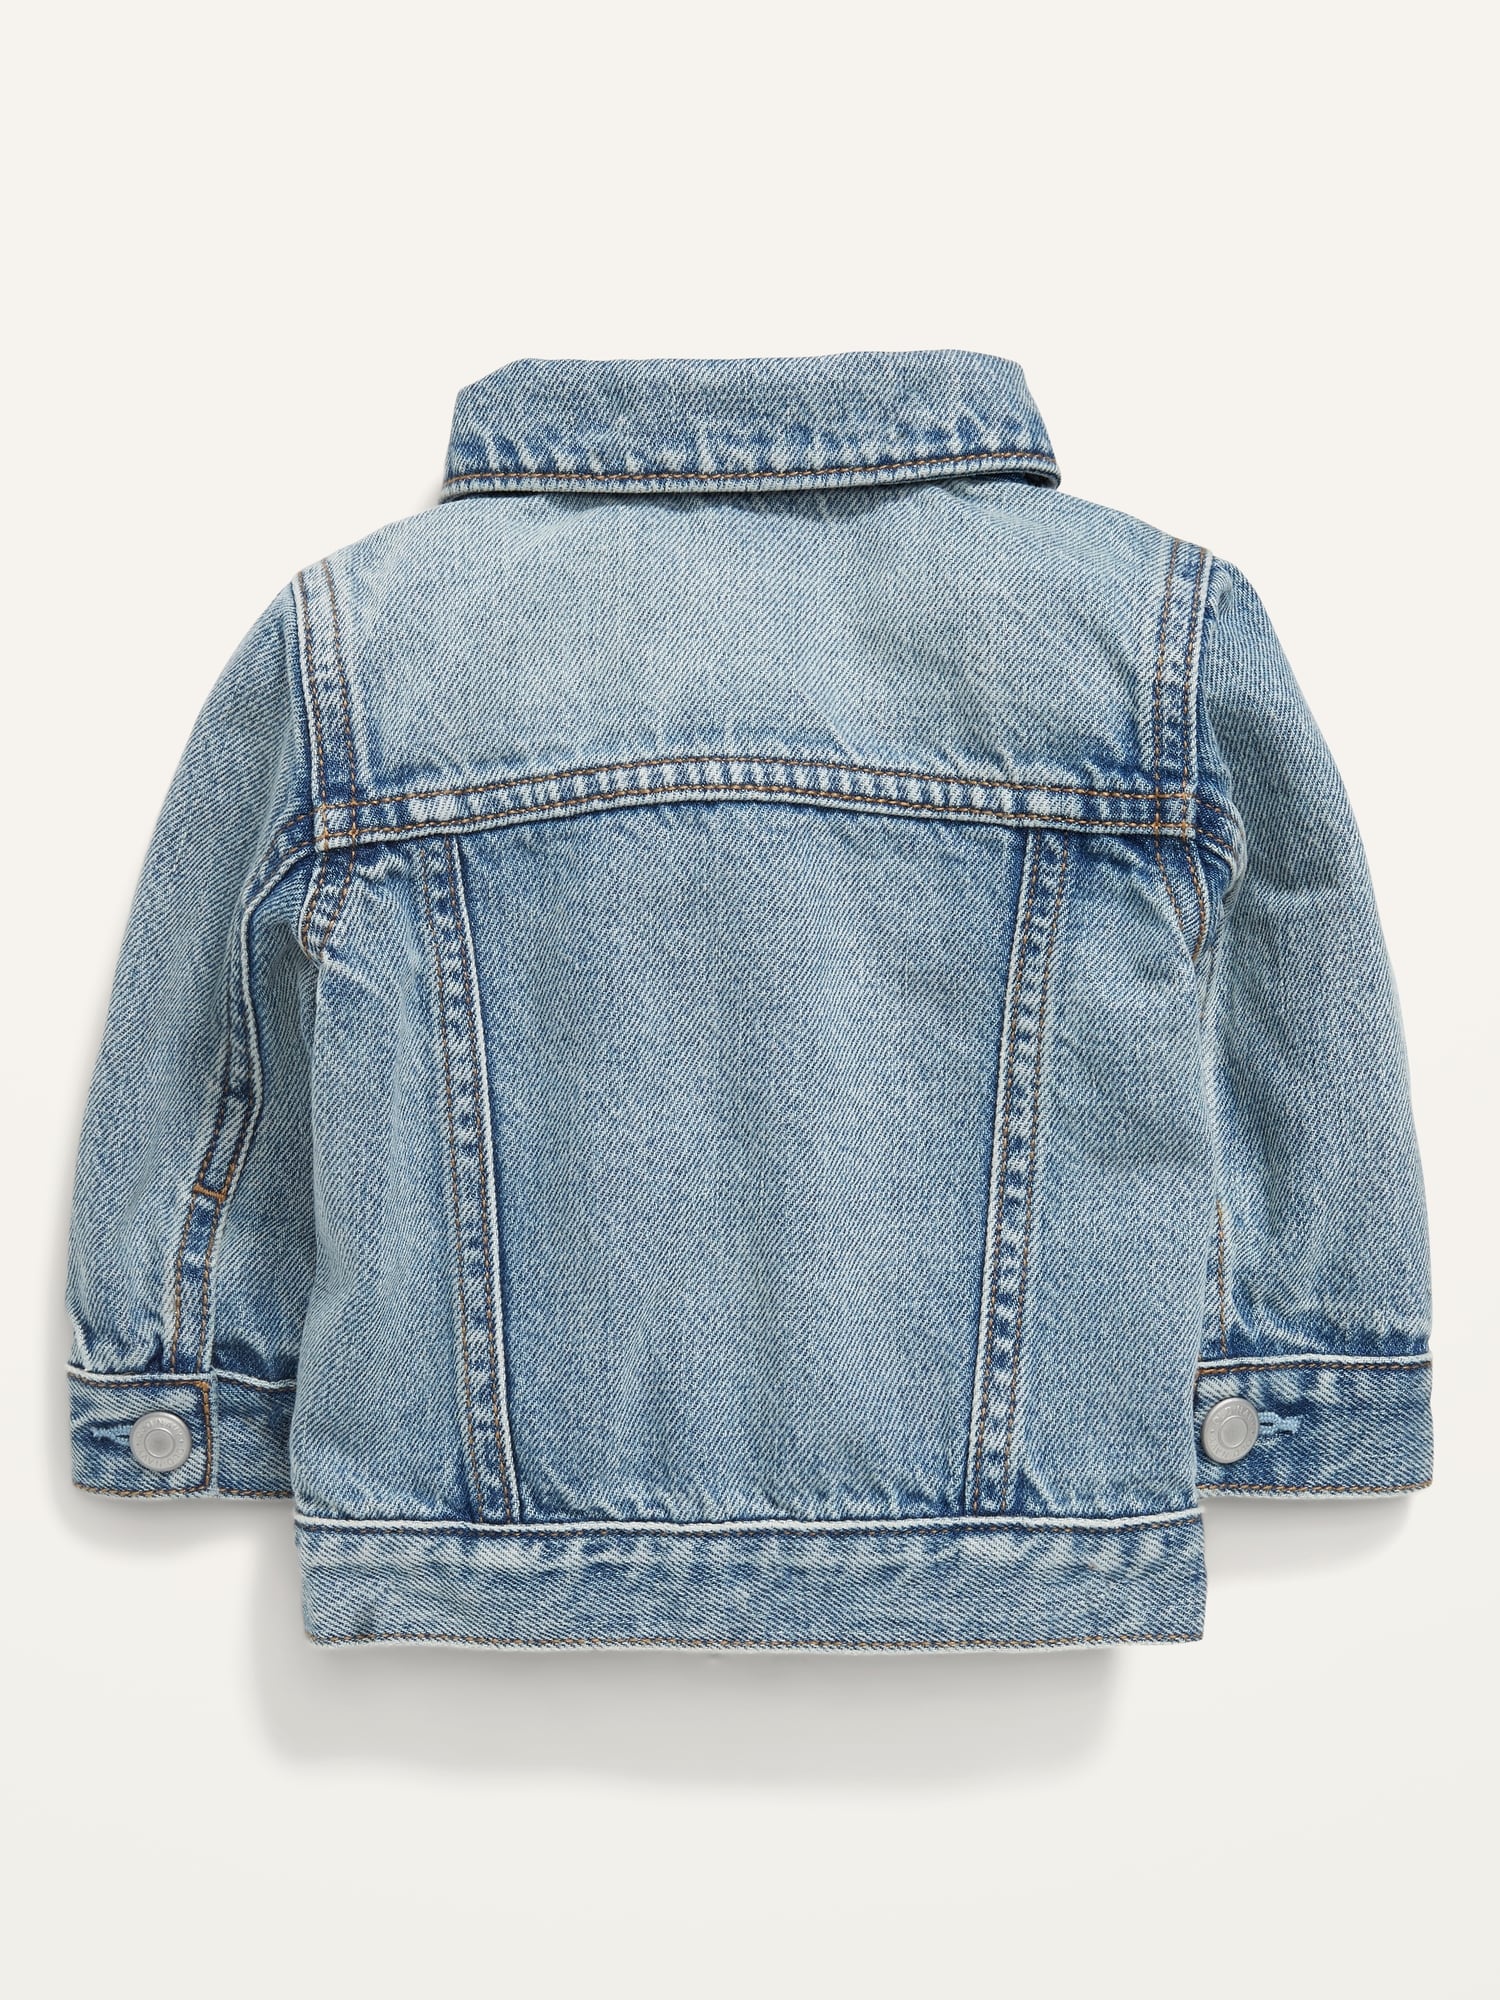 Fashionable Girls Jean Jacket For Comfort And Style - Alibaba.com-saigonsouth.com.vn